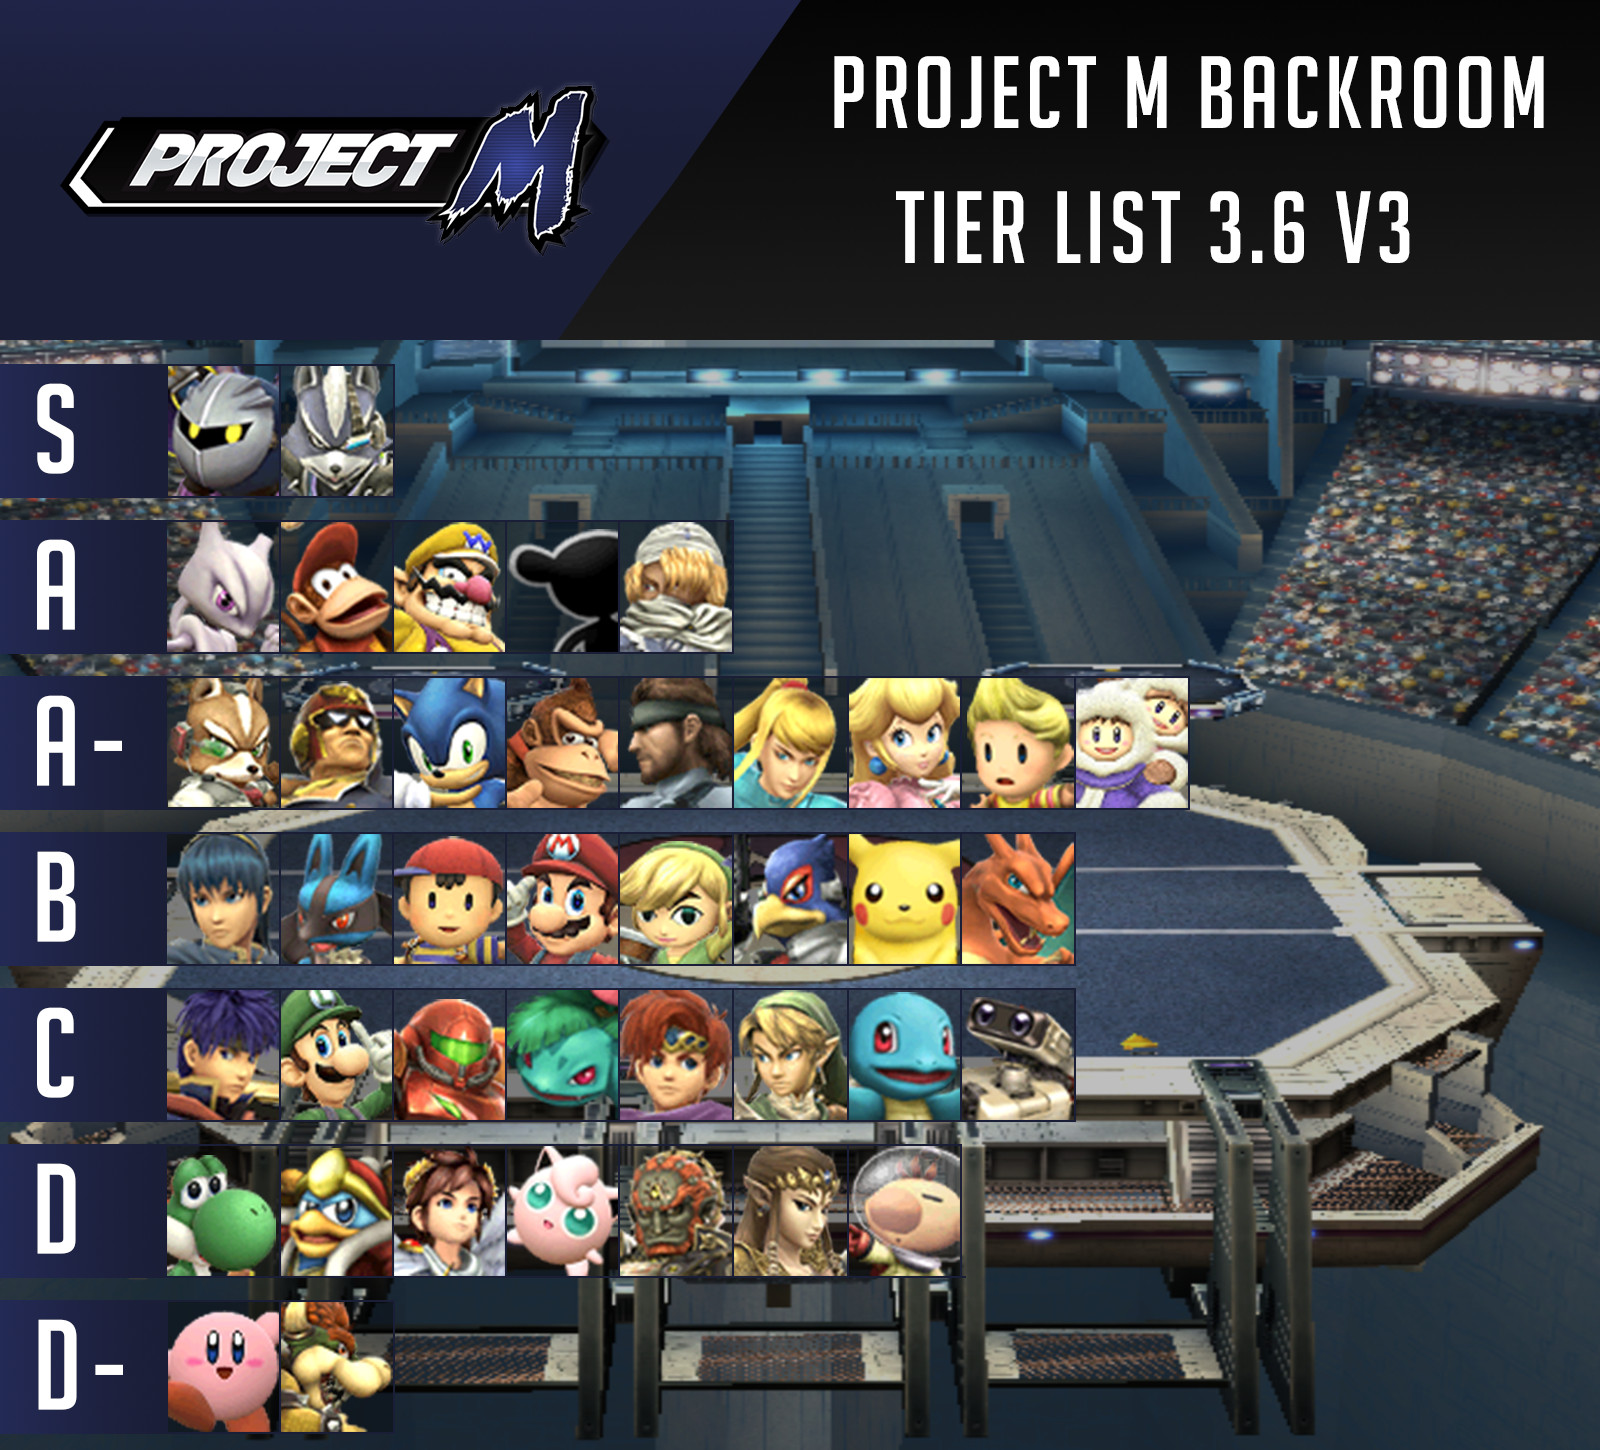 - Updated Project M Tier List from... 